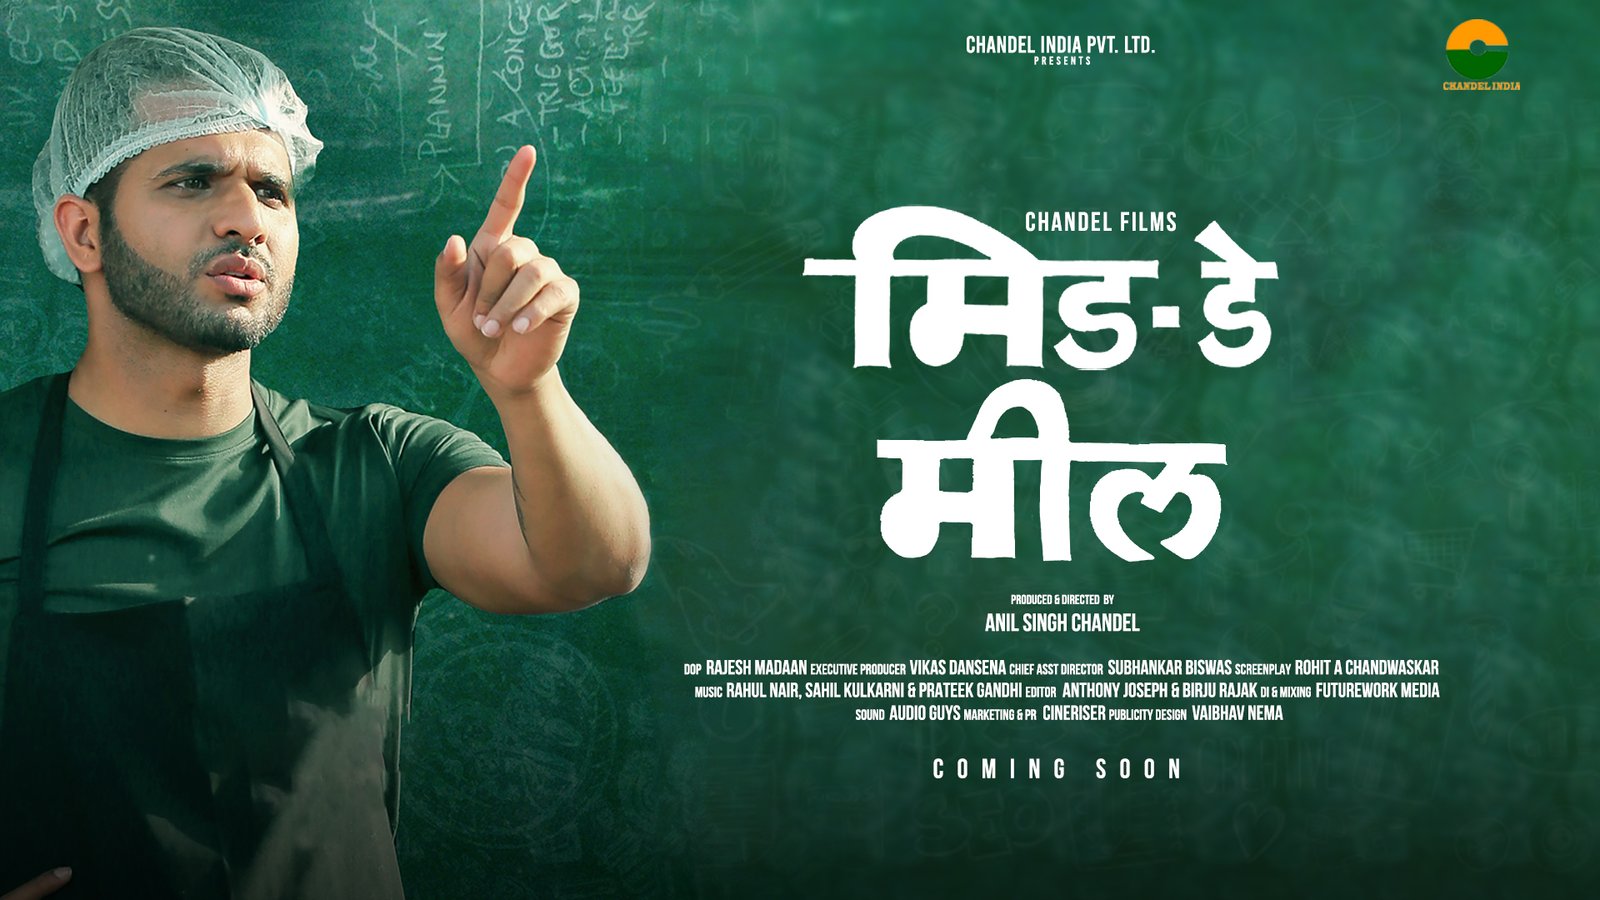 You are currently viewing “Ranvir Shorey has done an excellent job on it, His character will amaze you”, says Anil Singh as he presents the official poster of his upcoming film ‘Midday Meeal’.